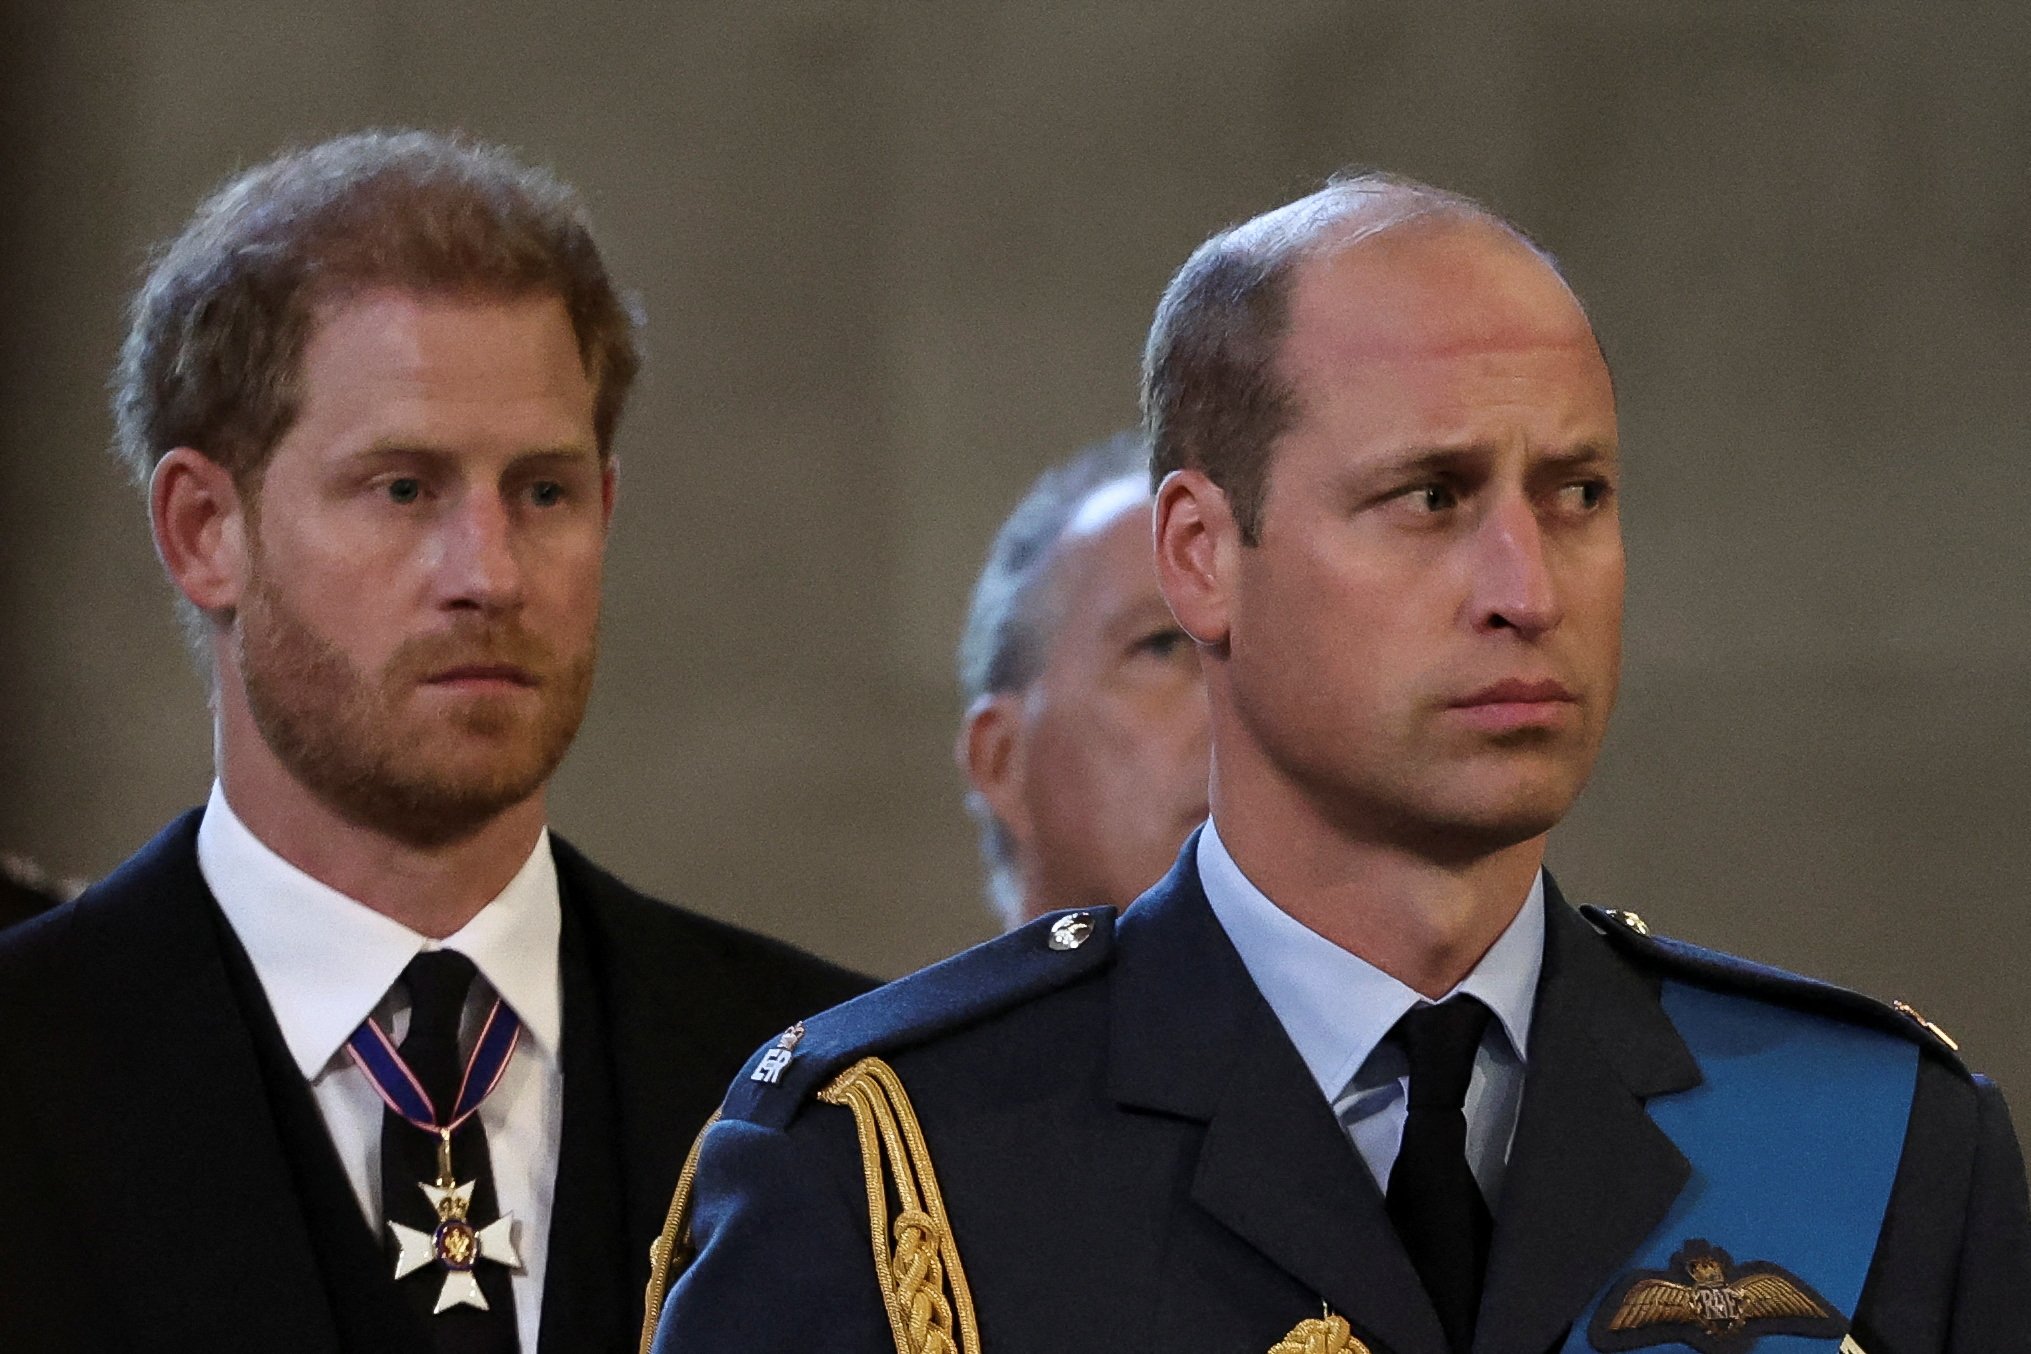 Prince Harry and Prince William reacts as the coffin of Britain's Queen Elizabeth II arrives at the Palace of Westminster, following a procession from Buckingham Palace, in London on September 14, 2022. | Source: Getty Images